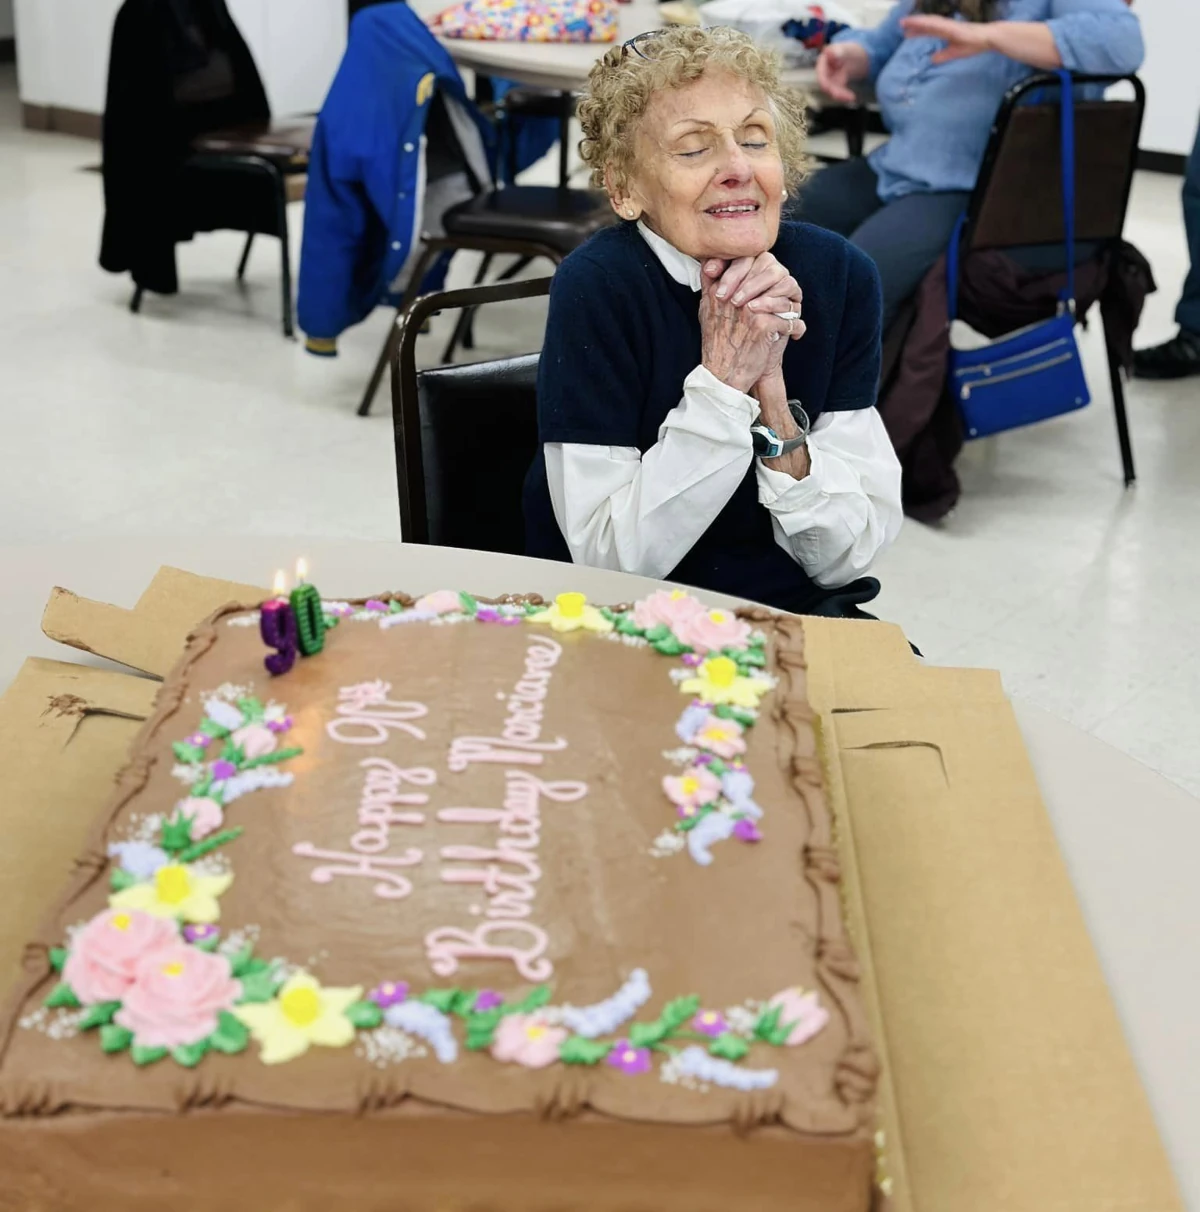 A special day for the Belle of Bonners Ferry